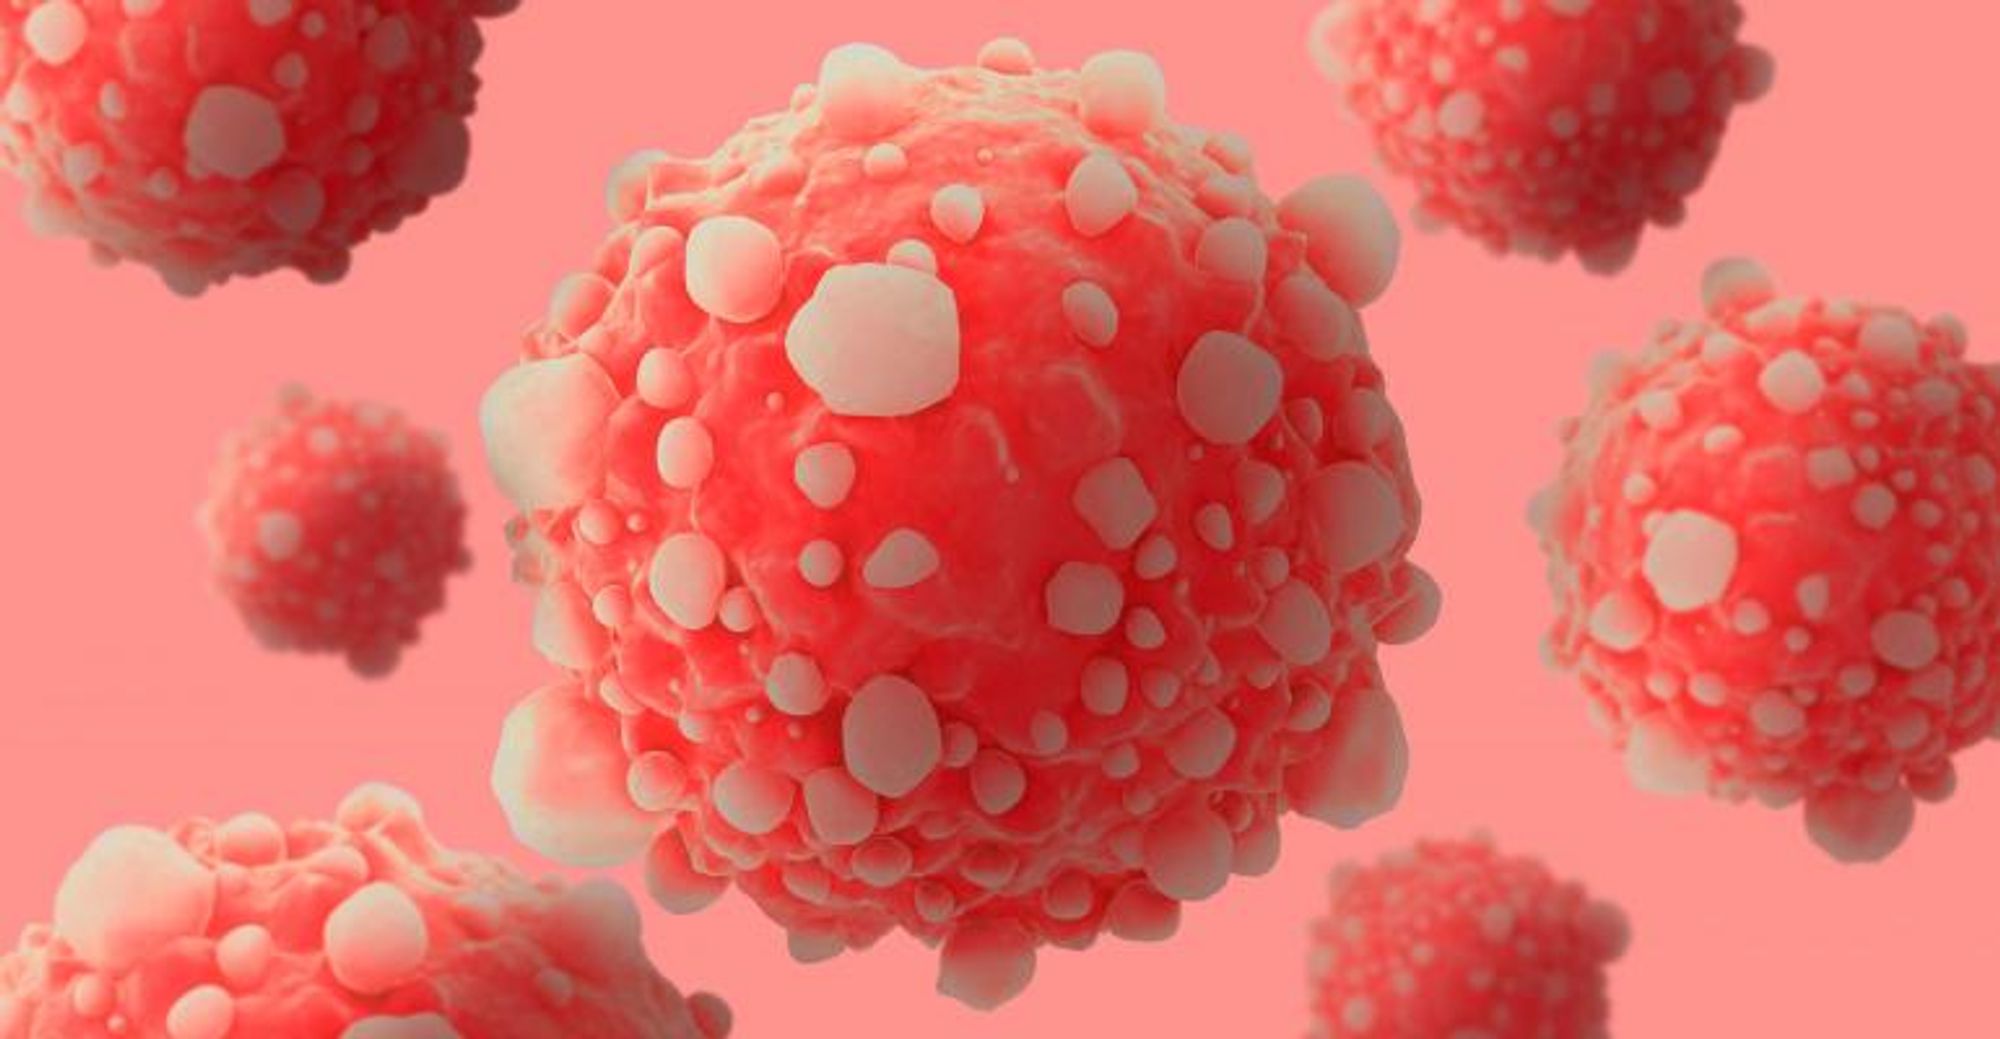 Shapeshifting Microrobots that Fight Cancer on a Cellular Level | mddionline.com